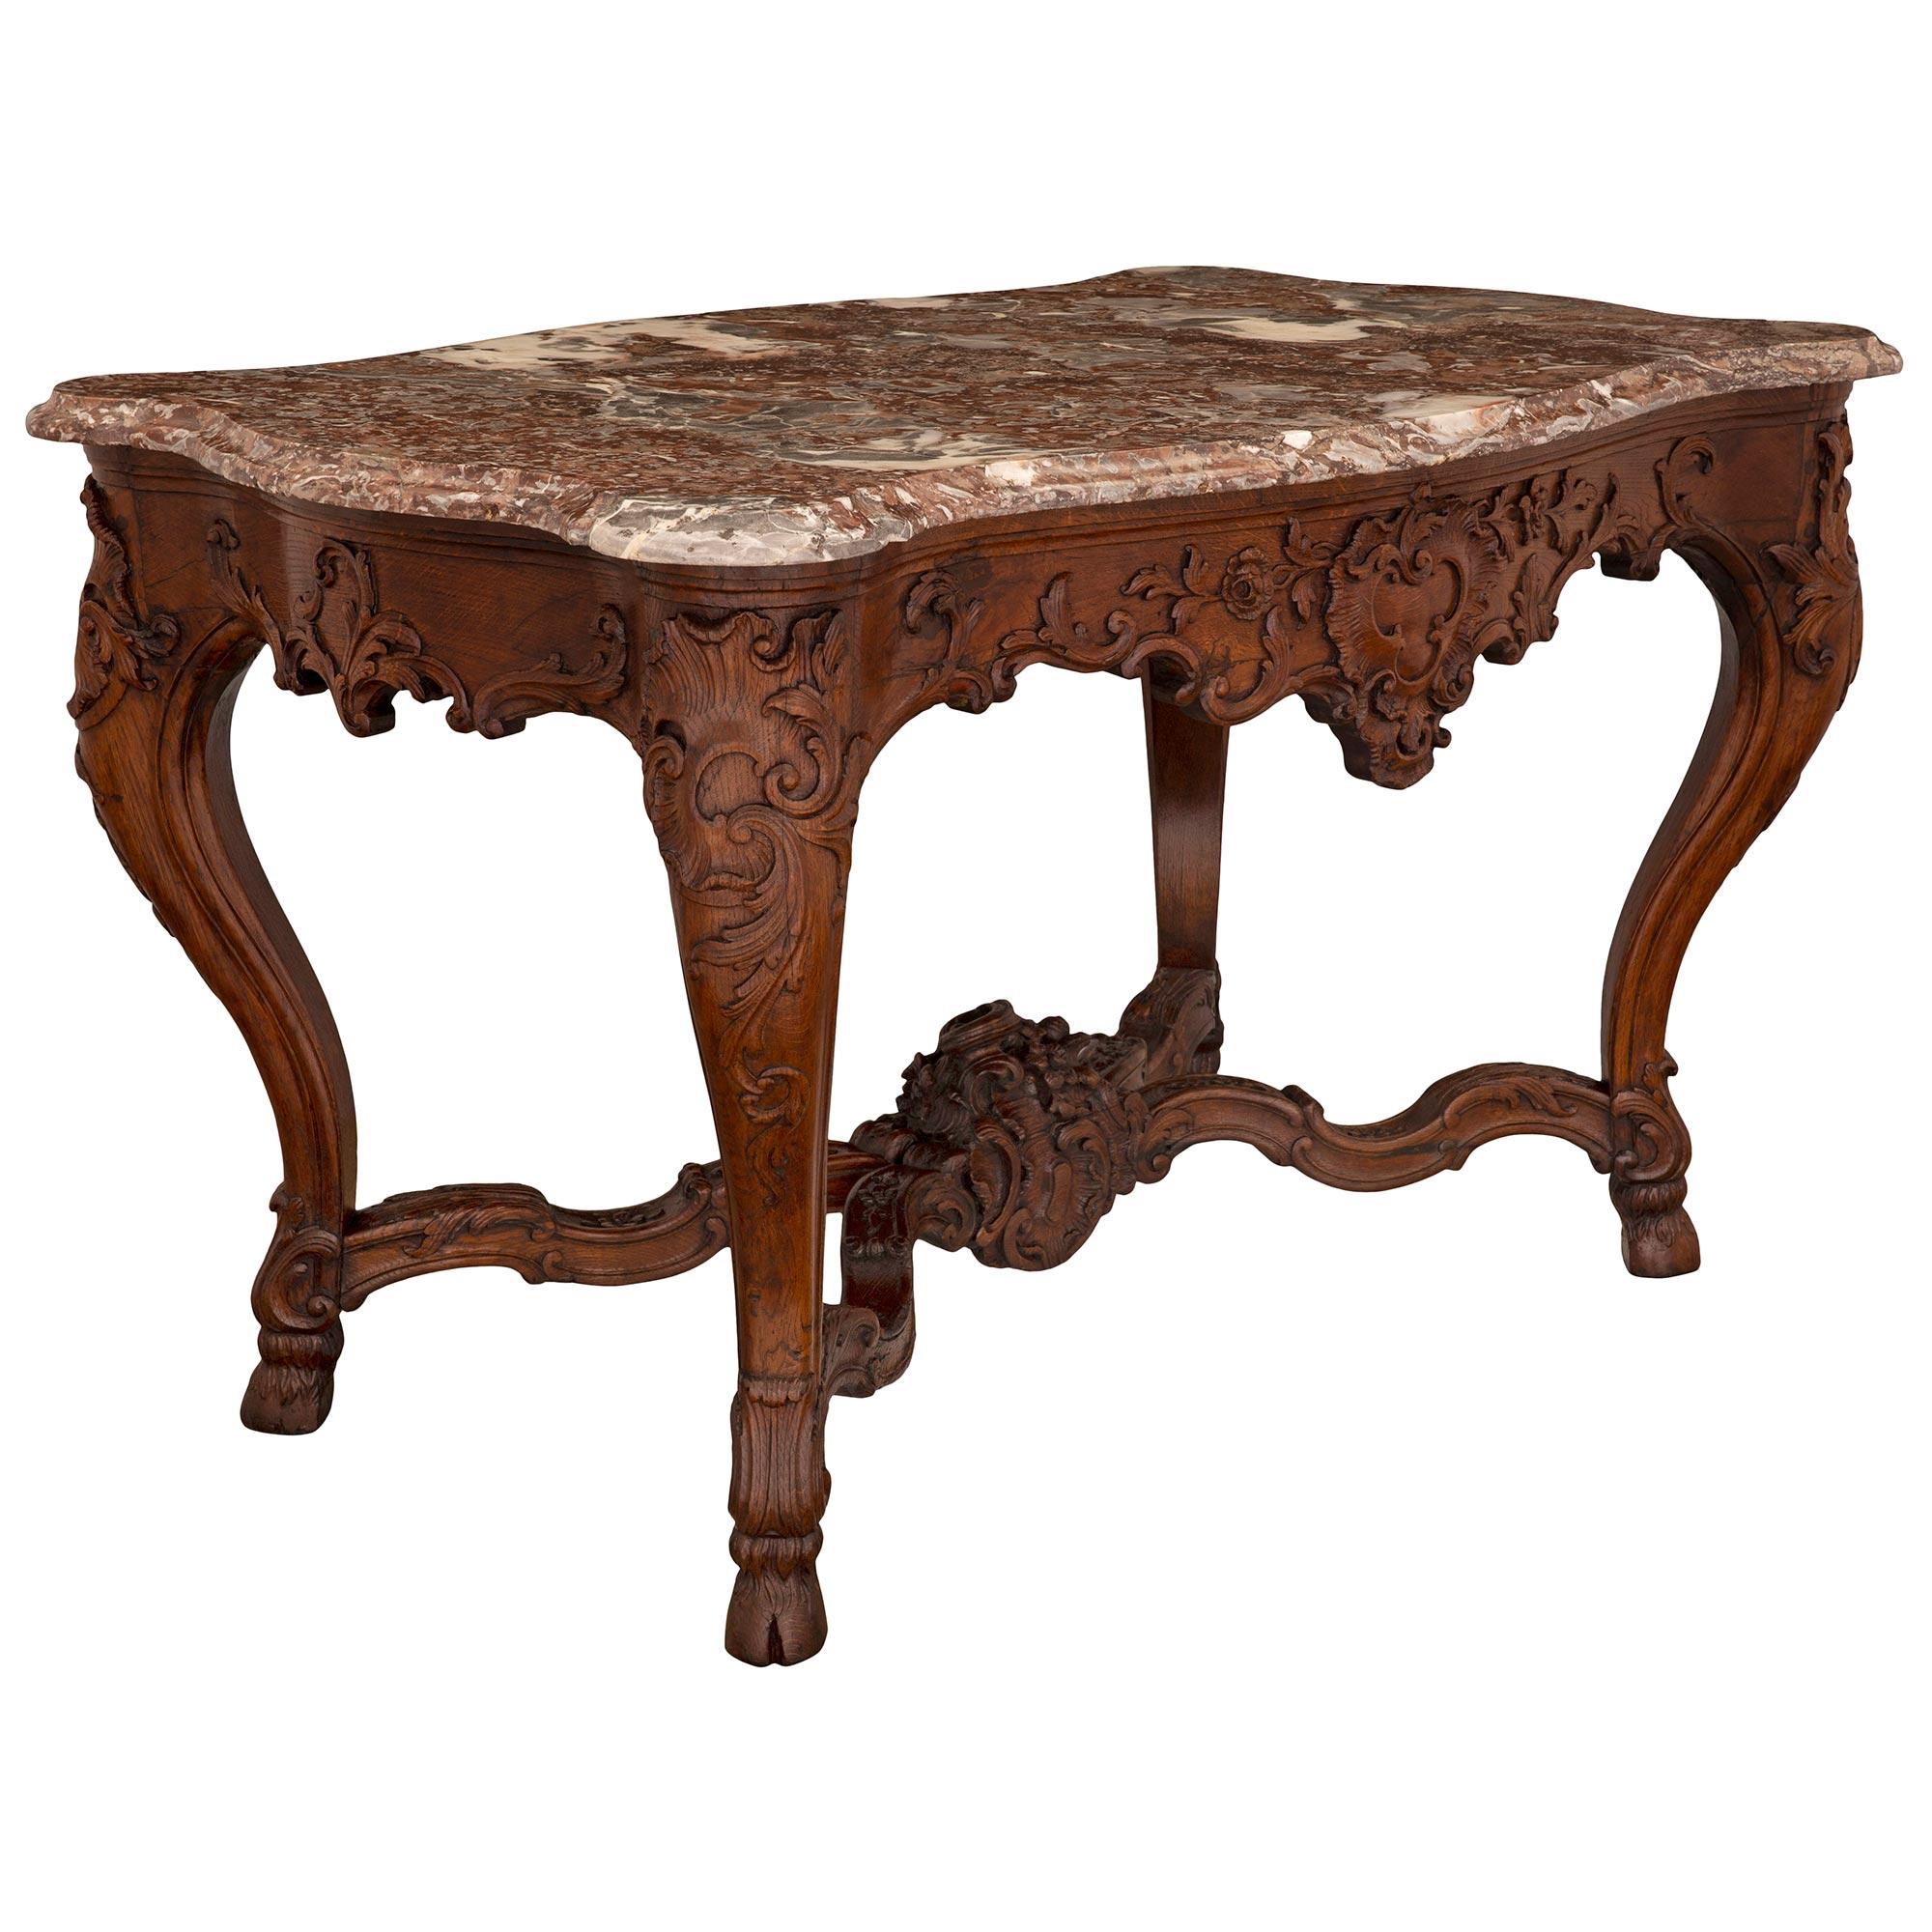 Regency French 18th Century Régence Period Walnut And Marble Center Table For Sale